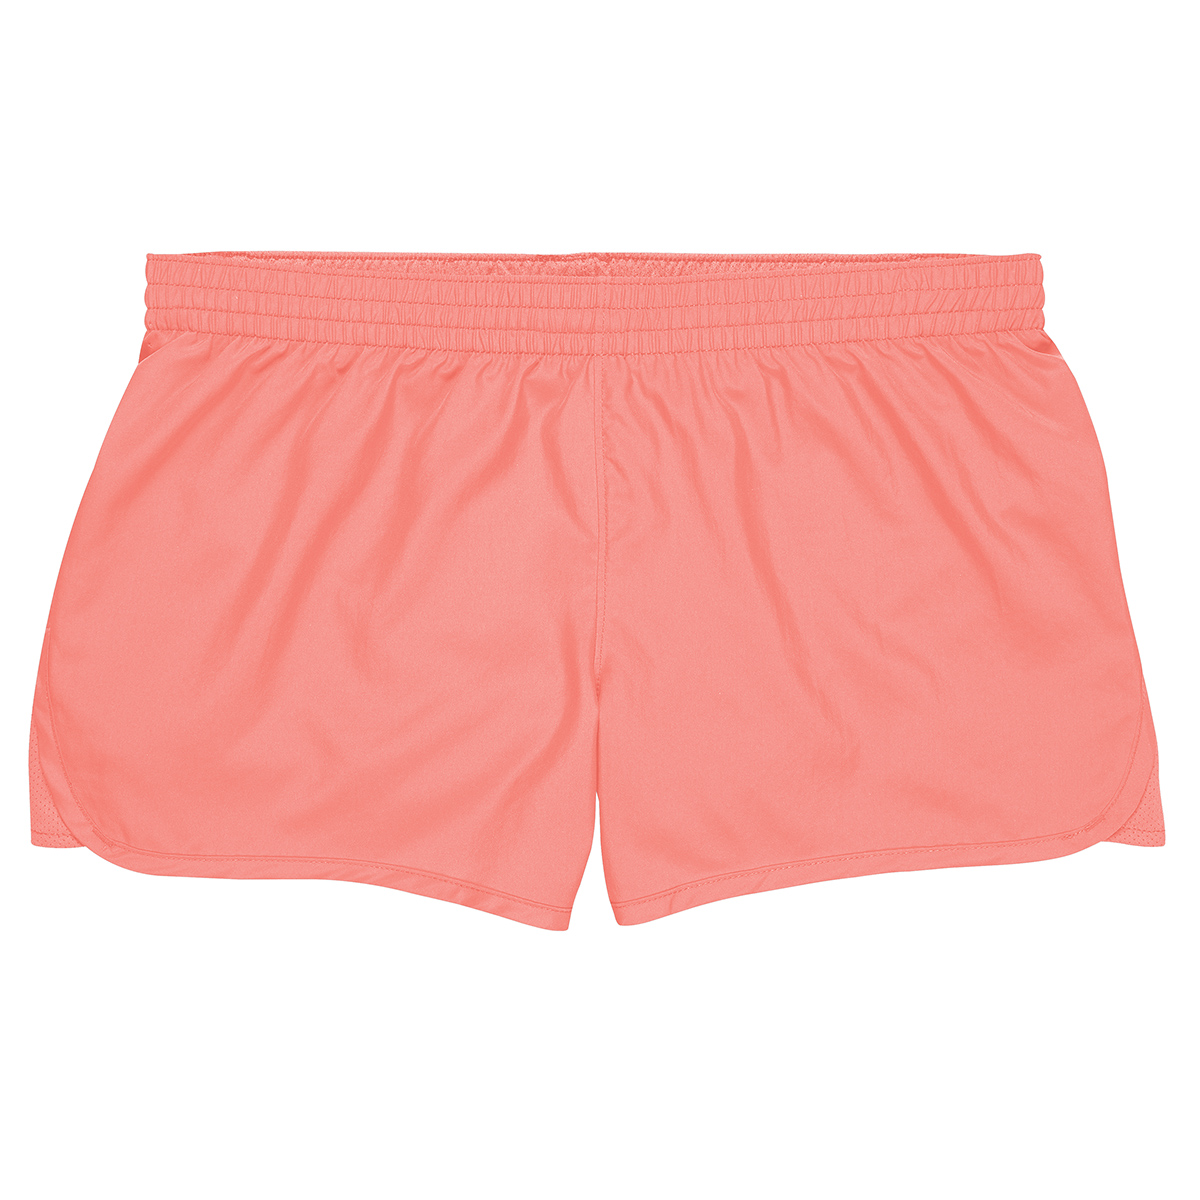 Cheerleading Shorts for Cheer Camps and Practice